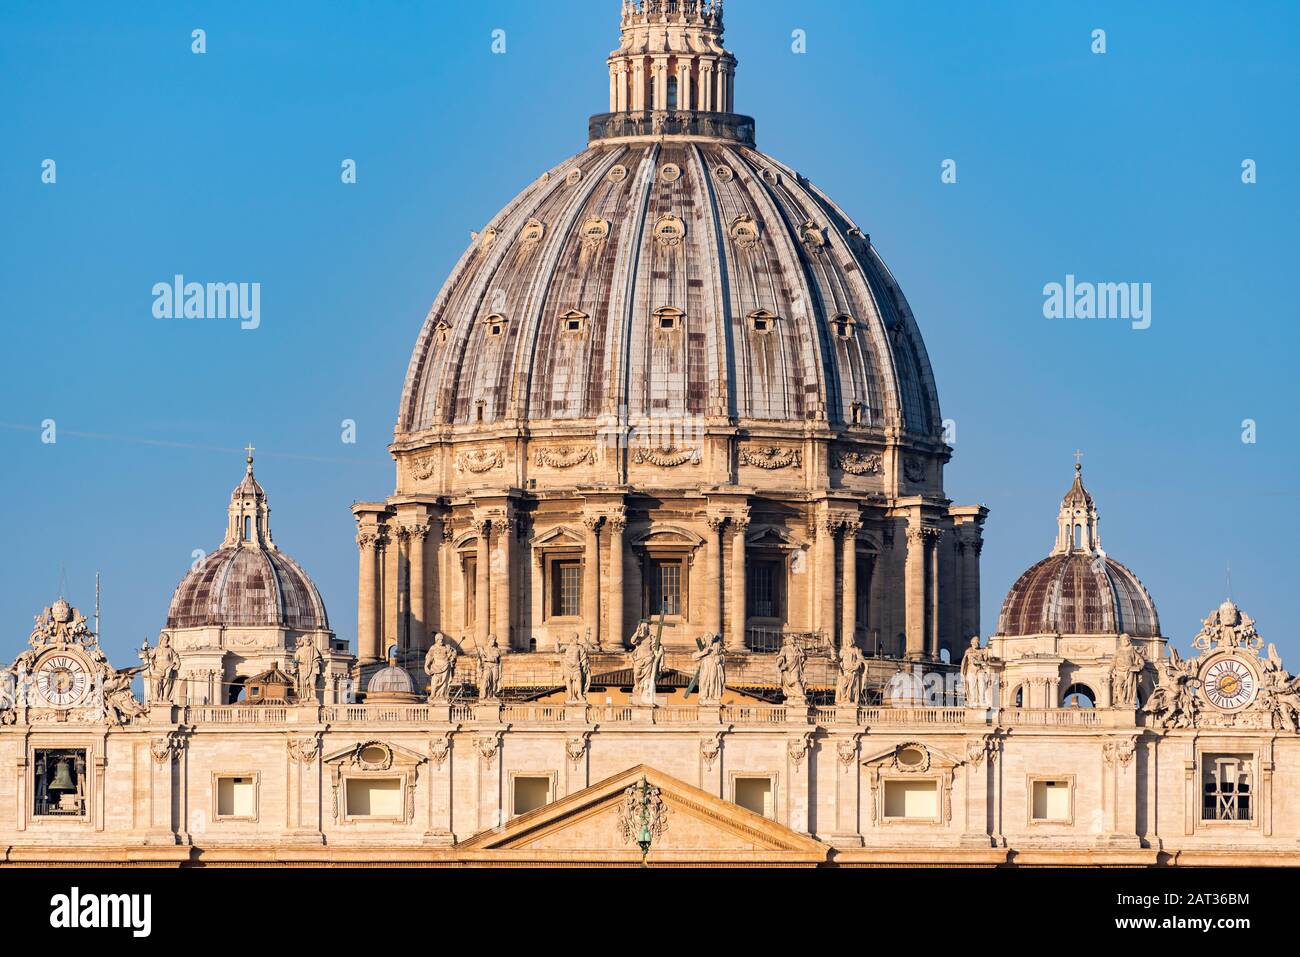 Cupola (dome) of St. Peter's Basilica, Piazza San Pietro, Vatican, Rome, Italy Stock Photo